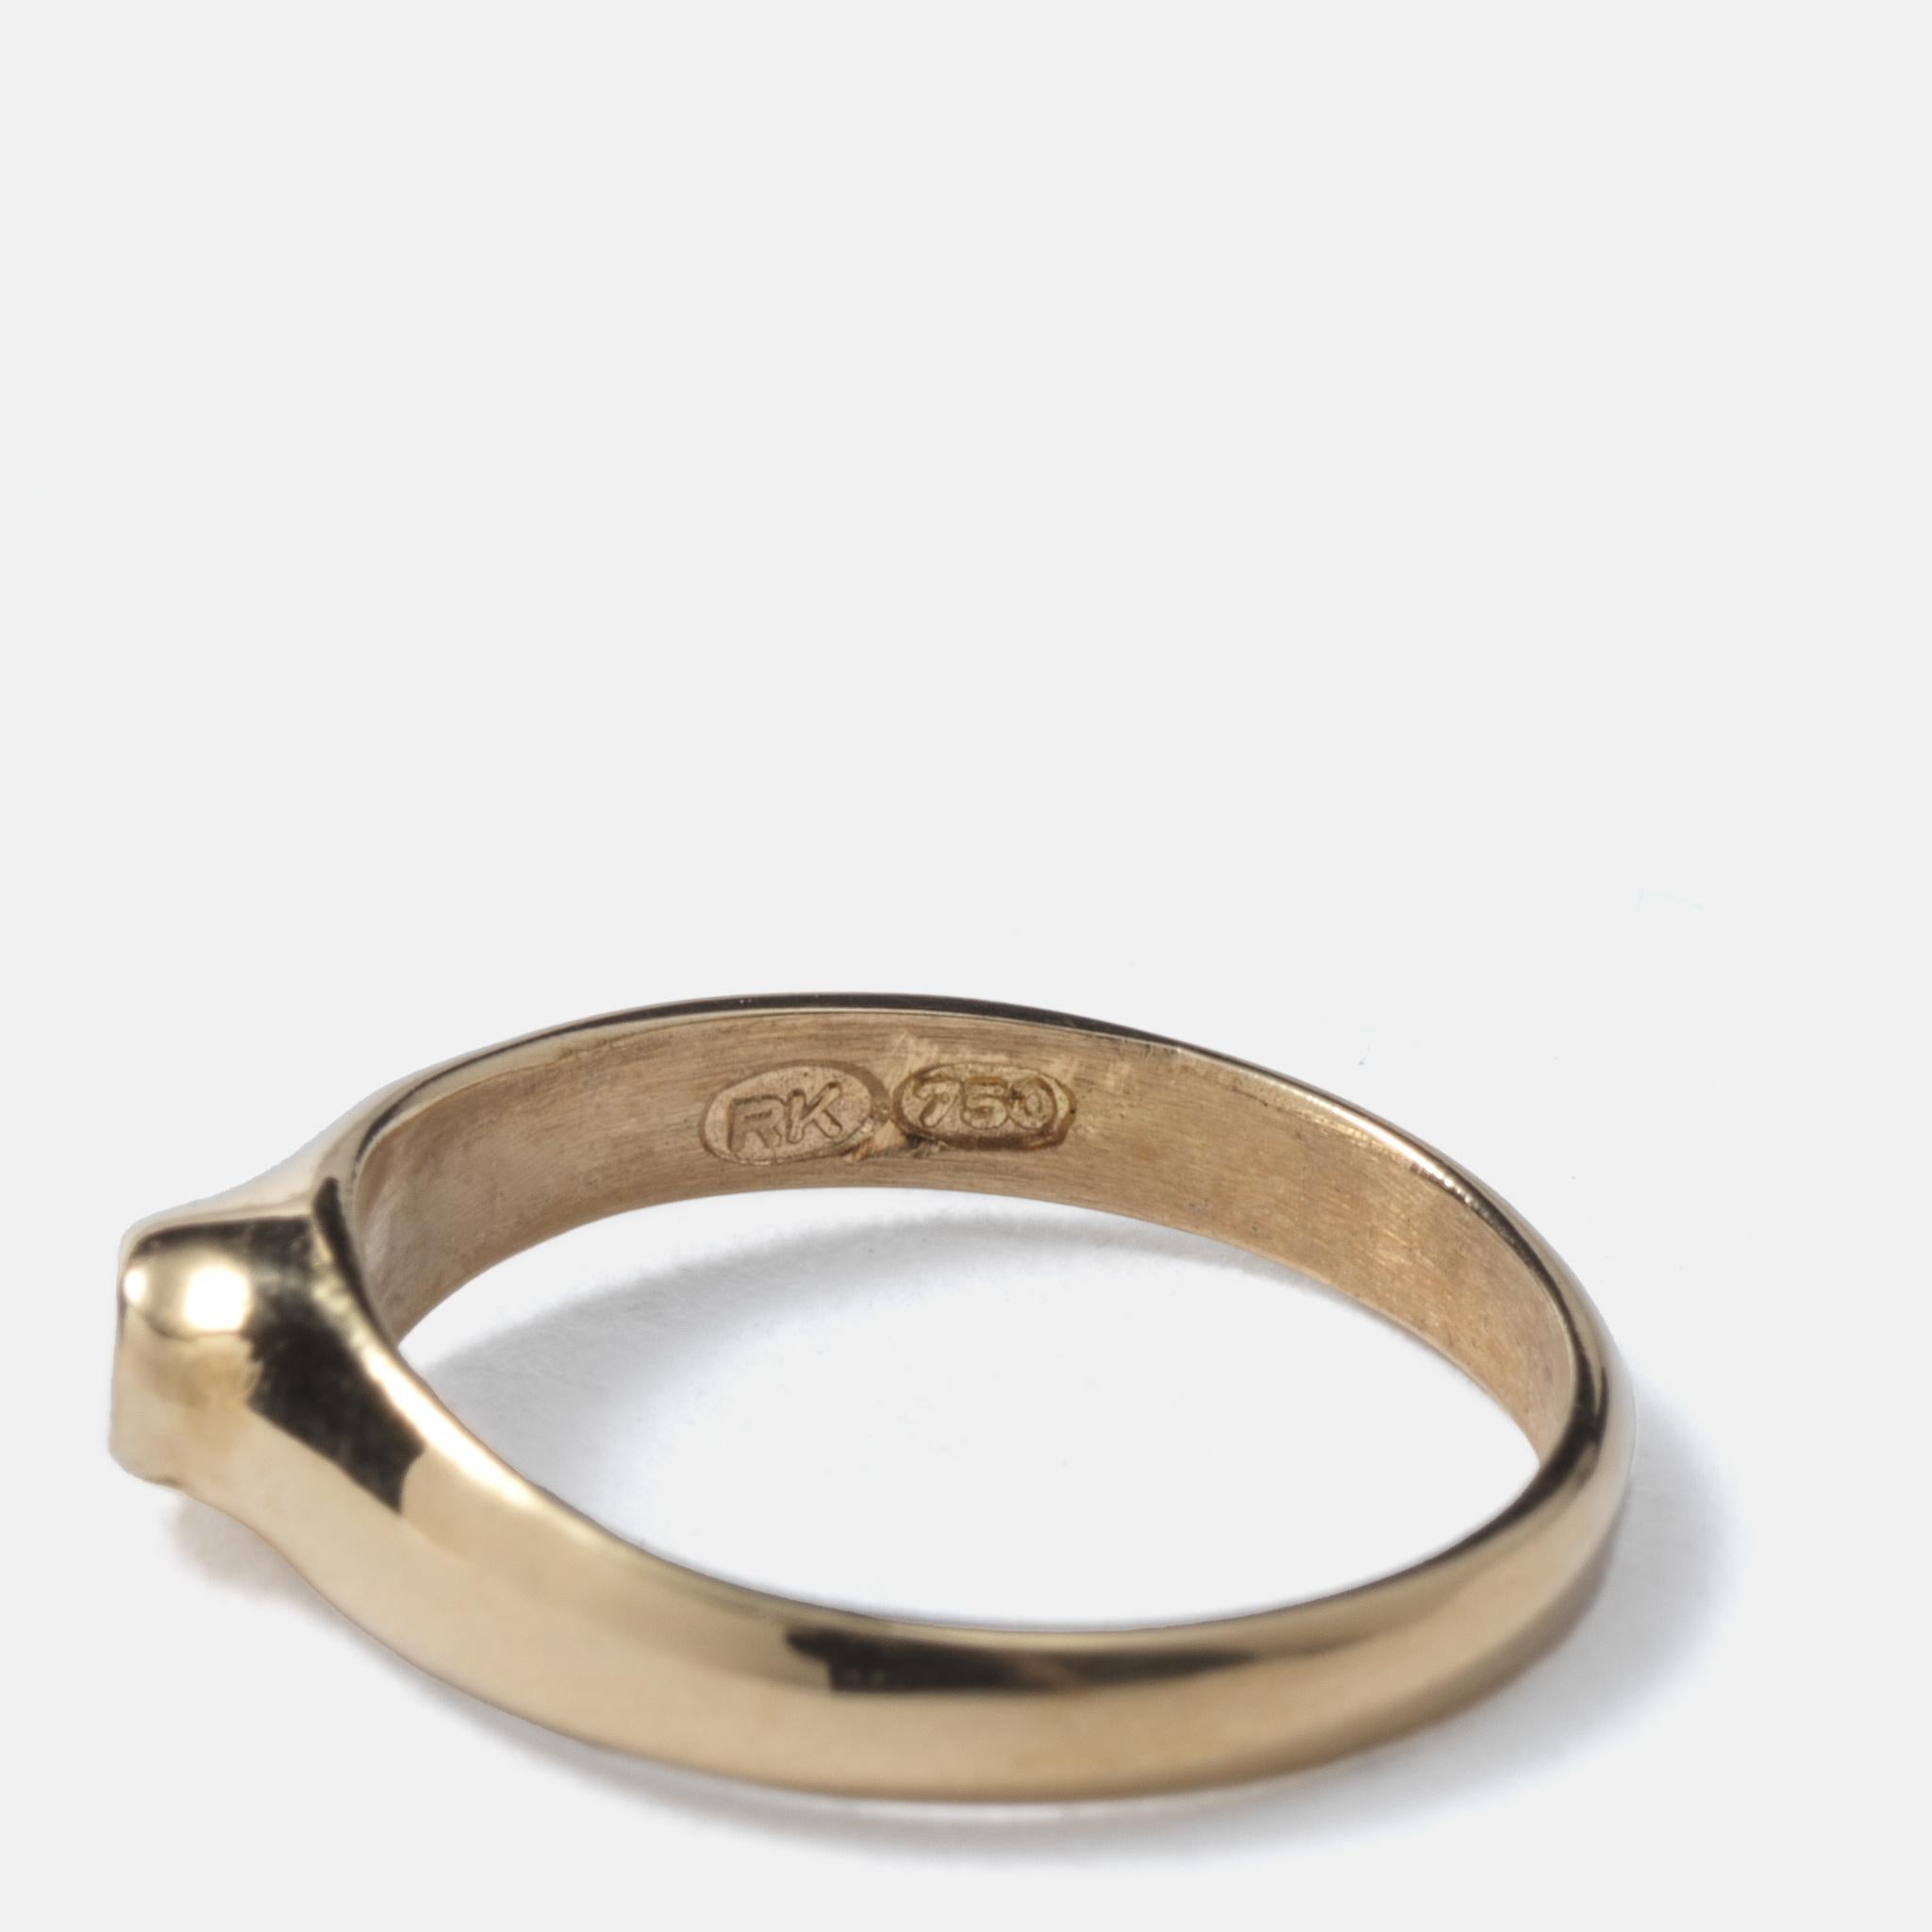 A unusual and very, very, very small ring. This one fits an infant and nobody else. Its made of 18k gold with a small framed bluish stone in the middle. Made in the north of Sweden in the mid 1980s.
This is the perfect gift for your best friends